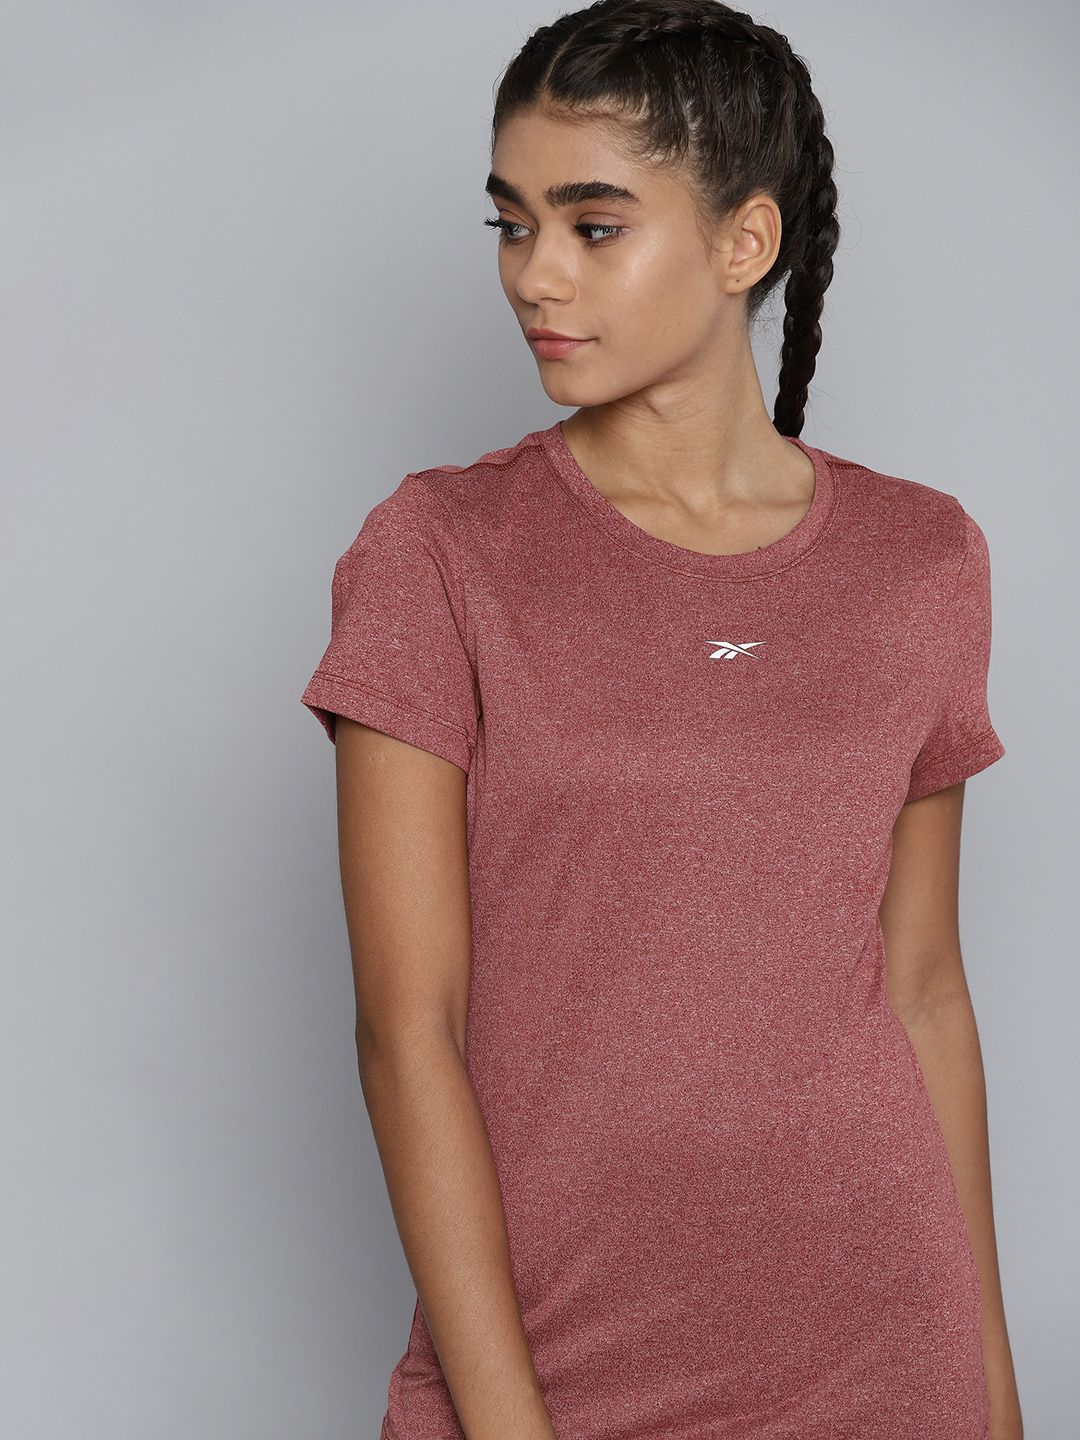 Reebok Women Maroon Solid  Training or Gym T-shirt Price in India